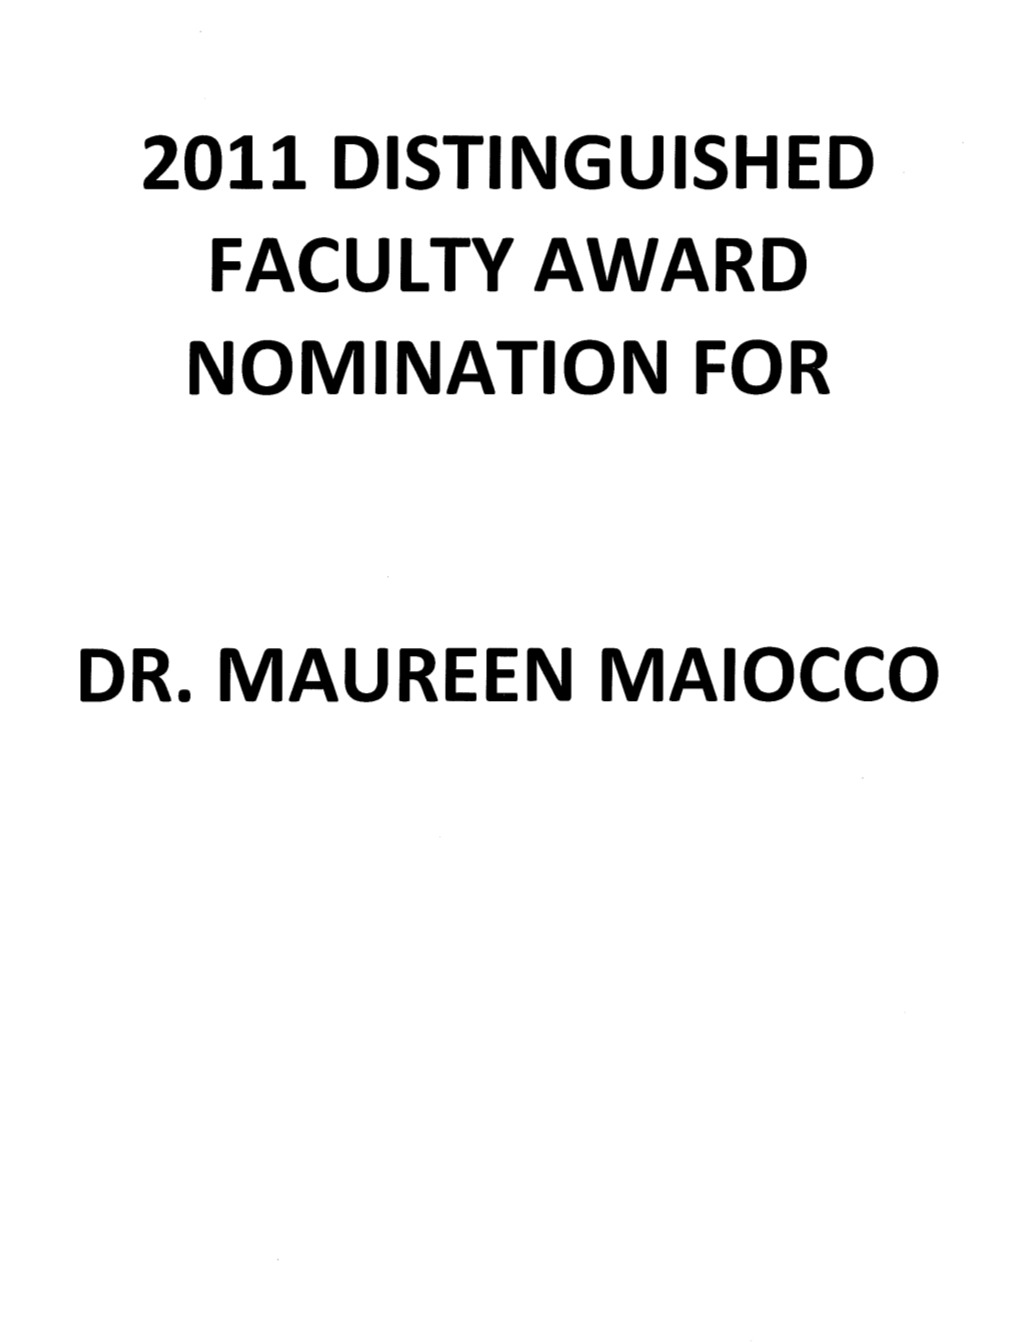 2011 Distinguished Faculty Award Nomination For